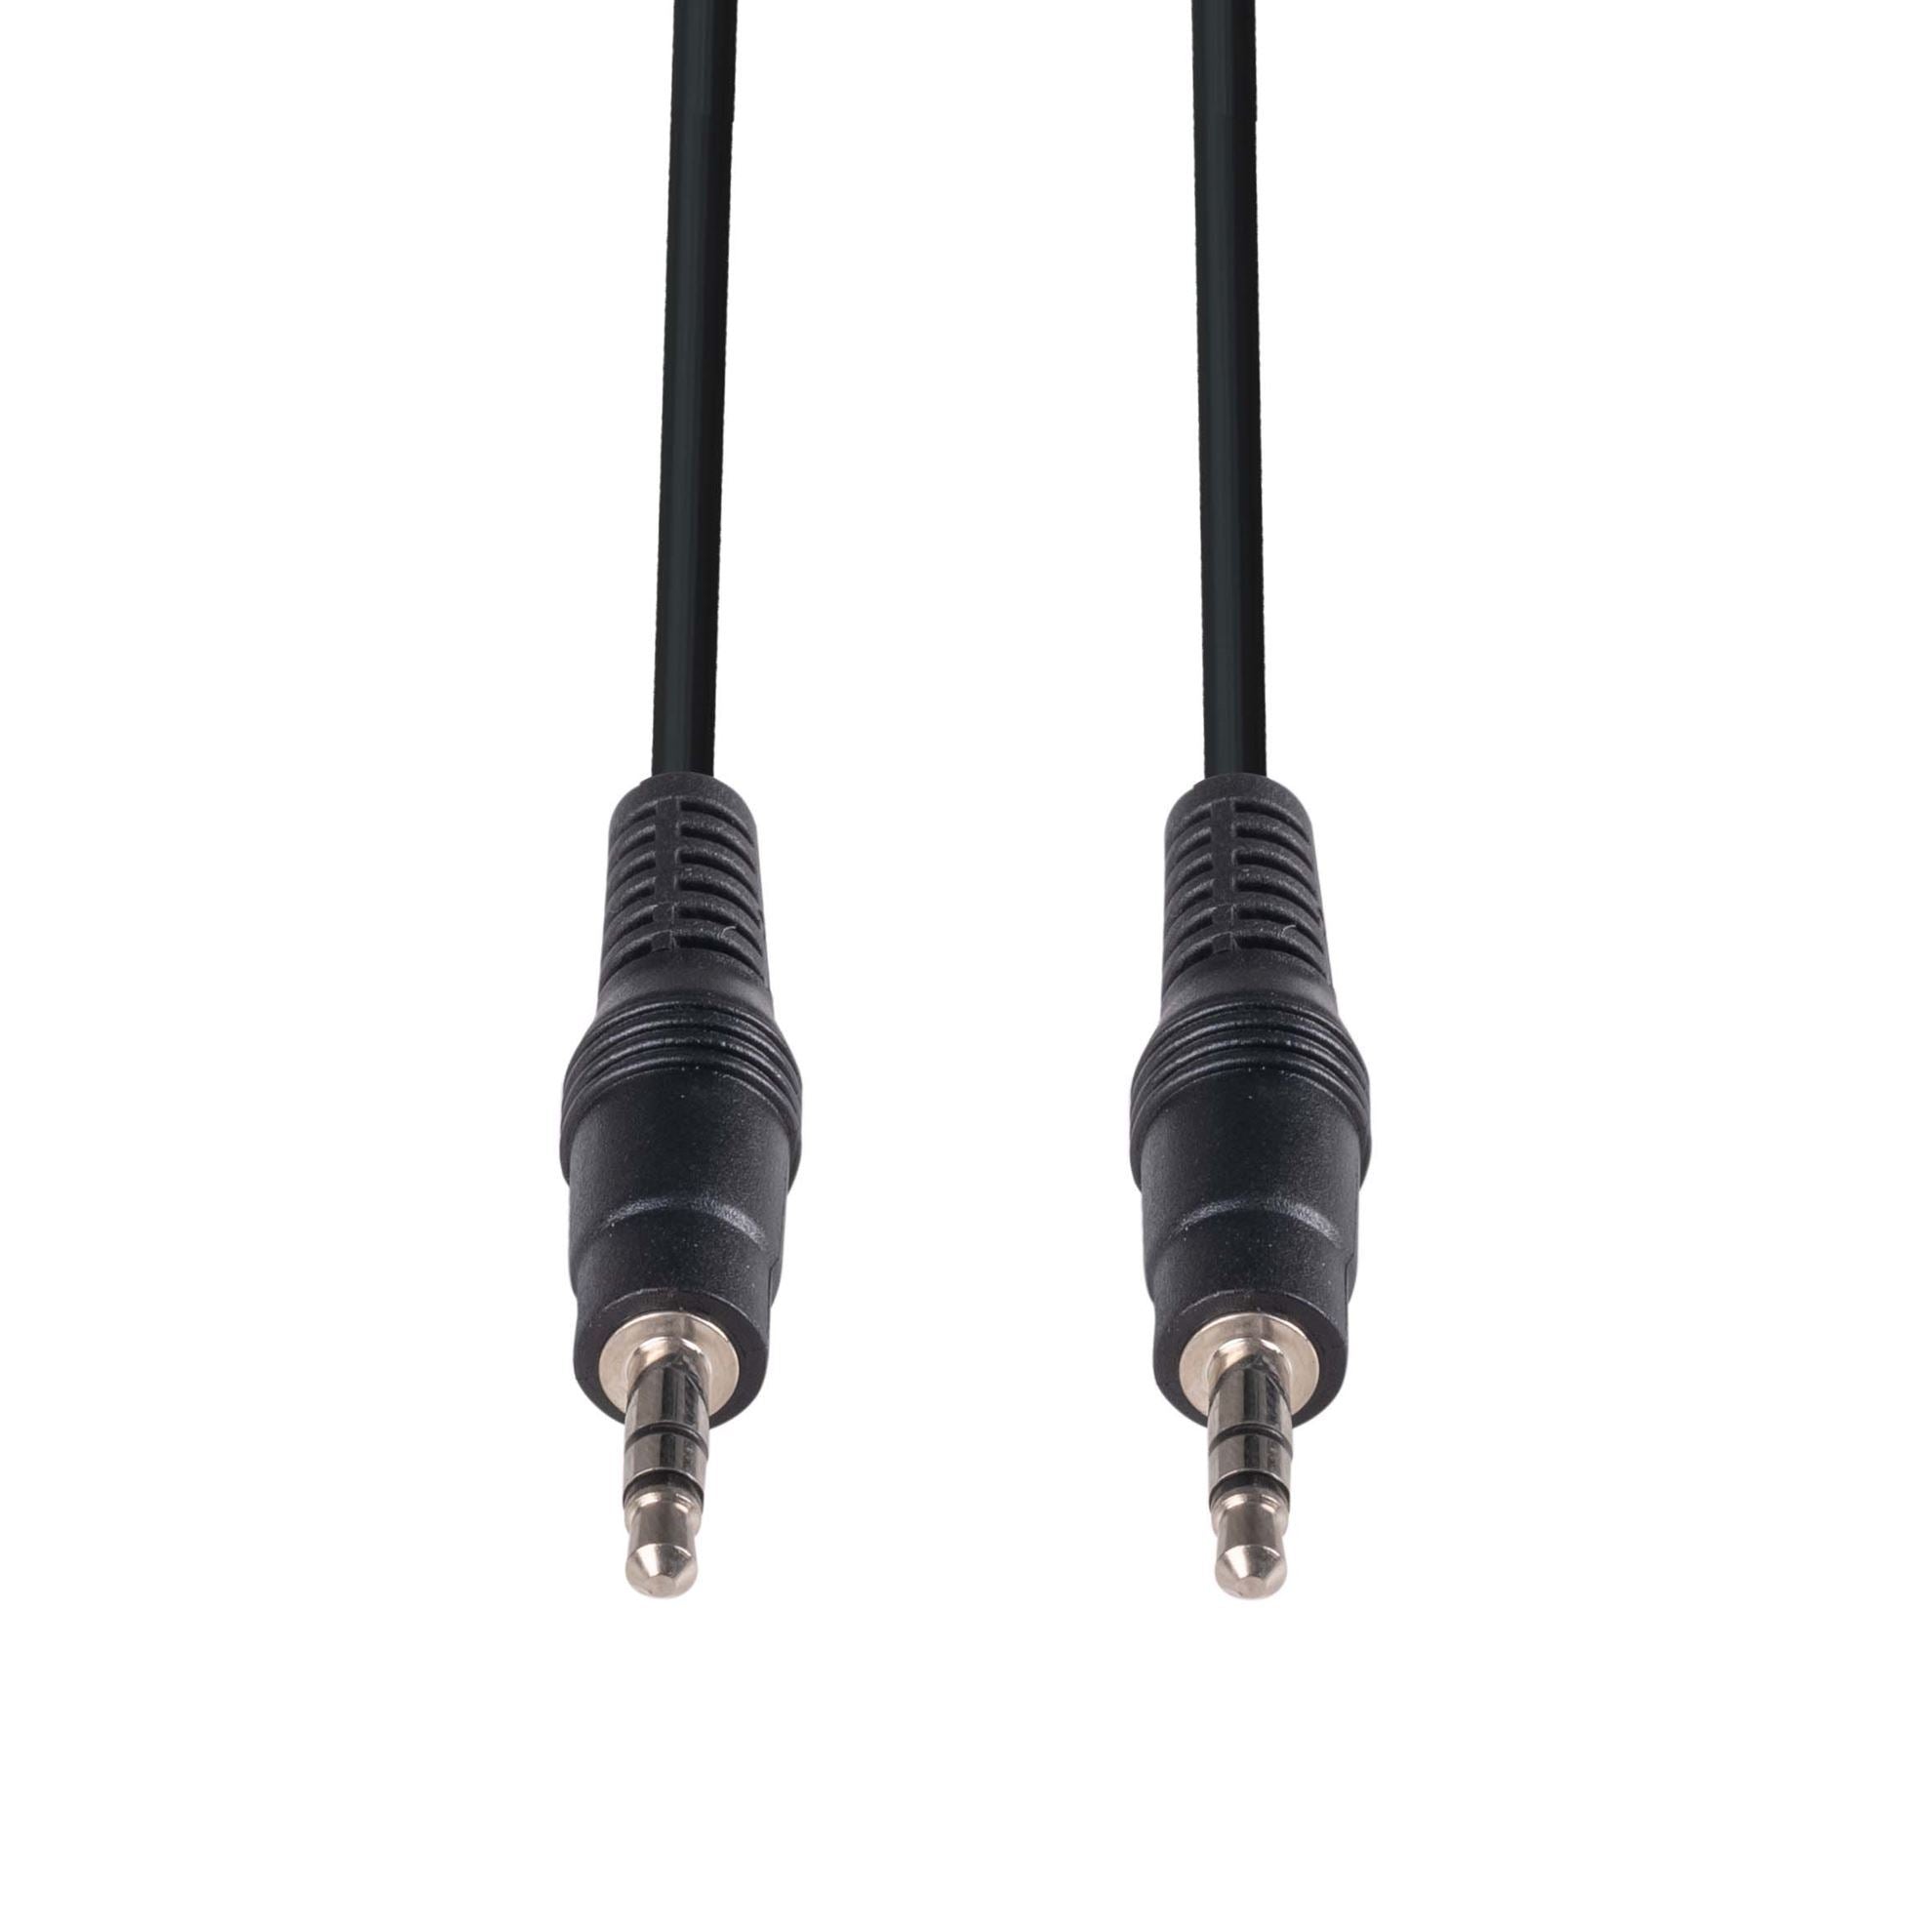 CA-ST-MMPP - Dynamix 0.3M Stereo 3.5mm Plug Male to Male Cable